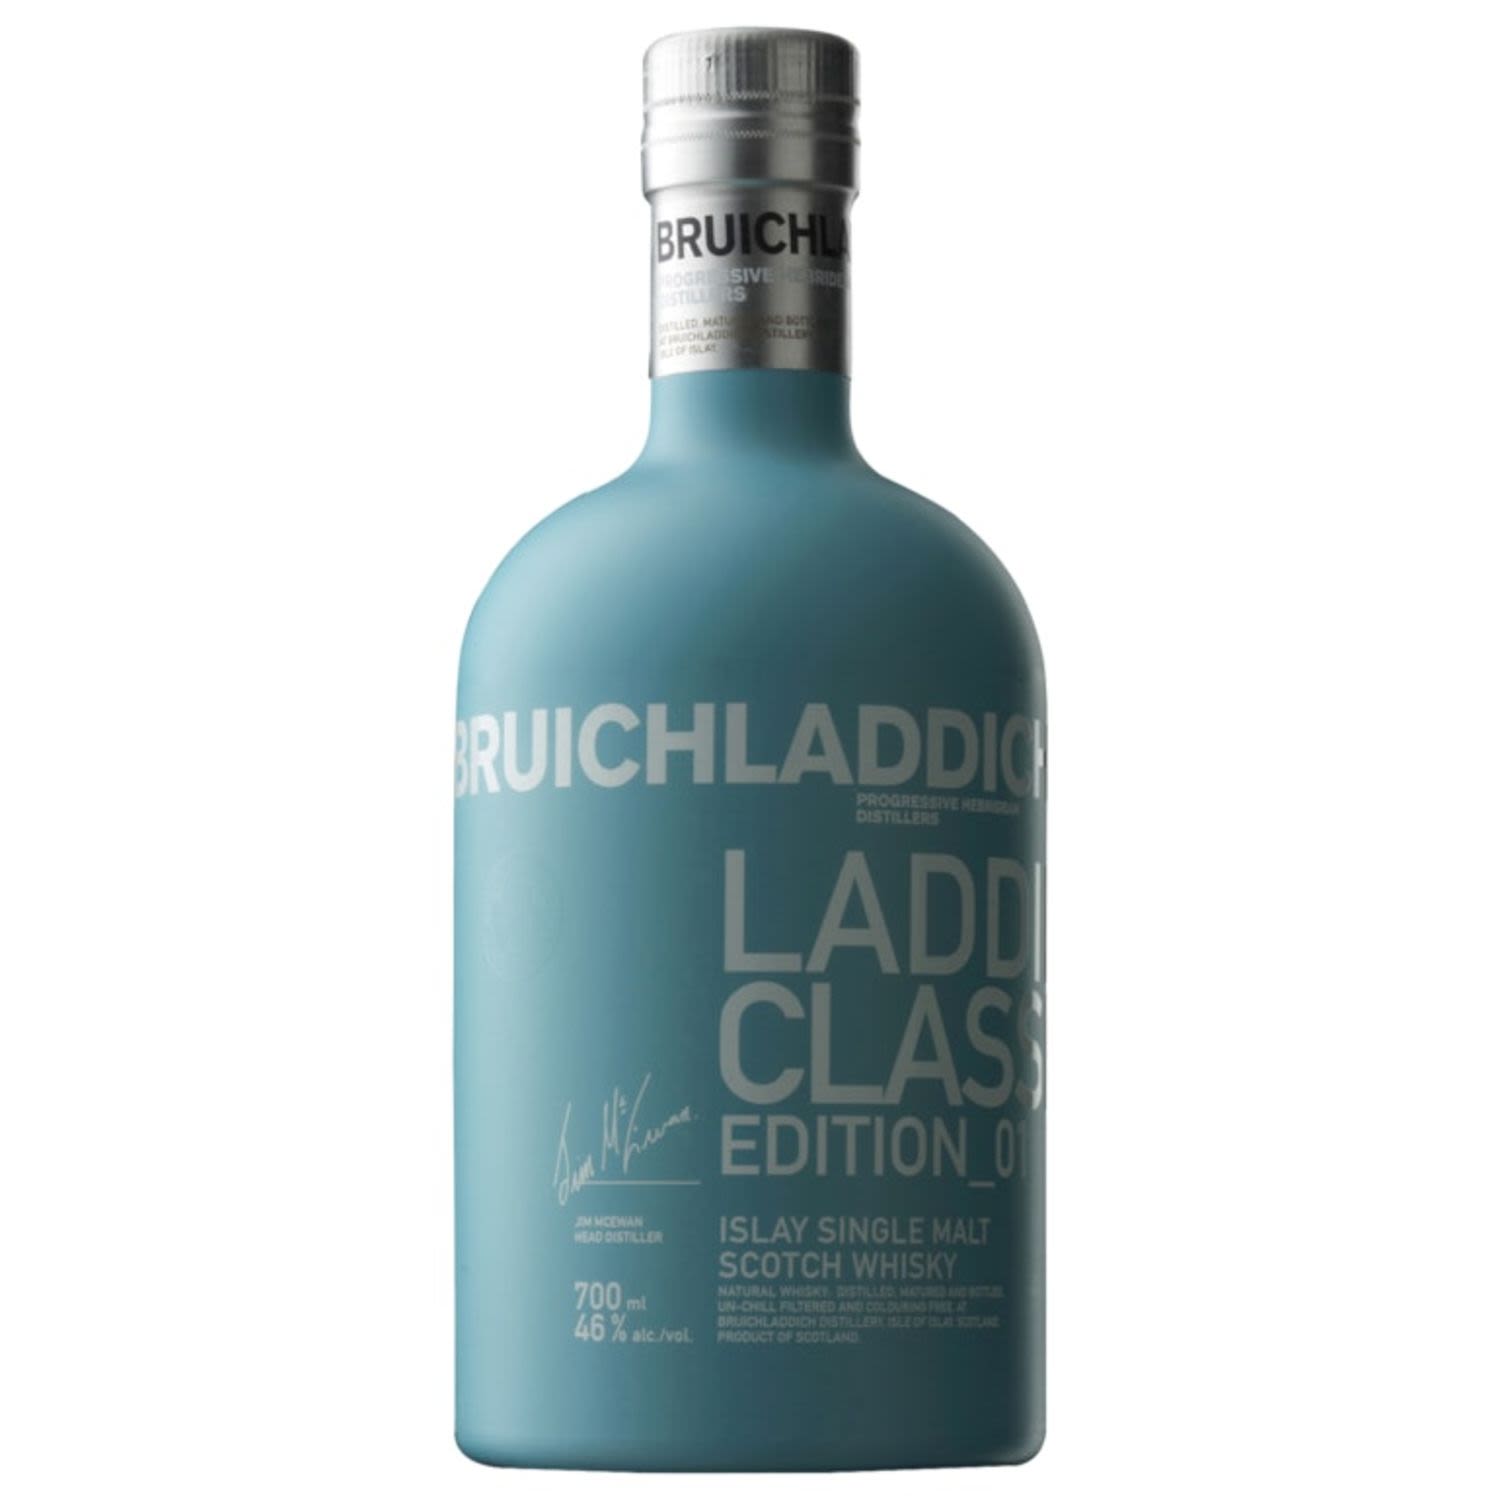 While well known Islay distillery Bruichladdich are famous (infamous!) for pushing the boundaries of distillation, sometimes a true classic is hard to ignore. Head Distiller McEwan has created a malt that is happy-go-lucky, an any time any place kind of spirit. Stamped with the trademark silkiness of palate that Bruichladdich is famous for along with a harmony of oak and gentle warmth that truly reflects those who have made this classic malt.<br /> <br />Alcohol Volume: 46.00%<br /><br />Pack Format: Bottle<br /><br />Standard Drinks: 25.4</br /><br />Pack Type: Bottle<br /><br />Country of Origin: Scotland<br />